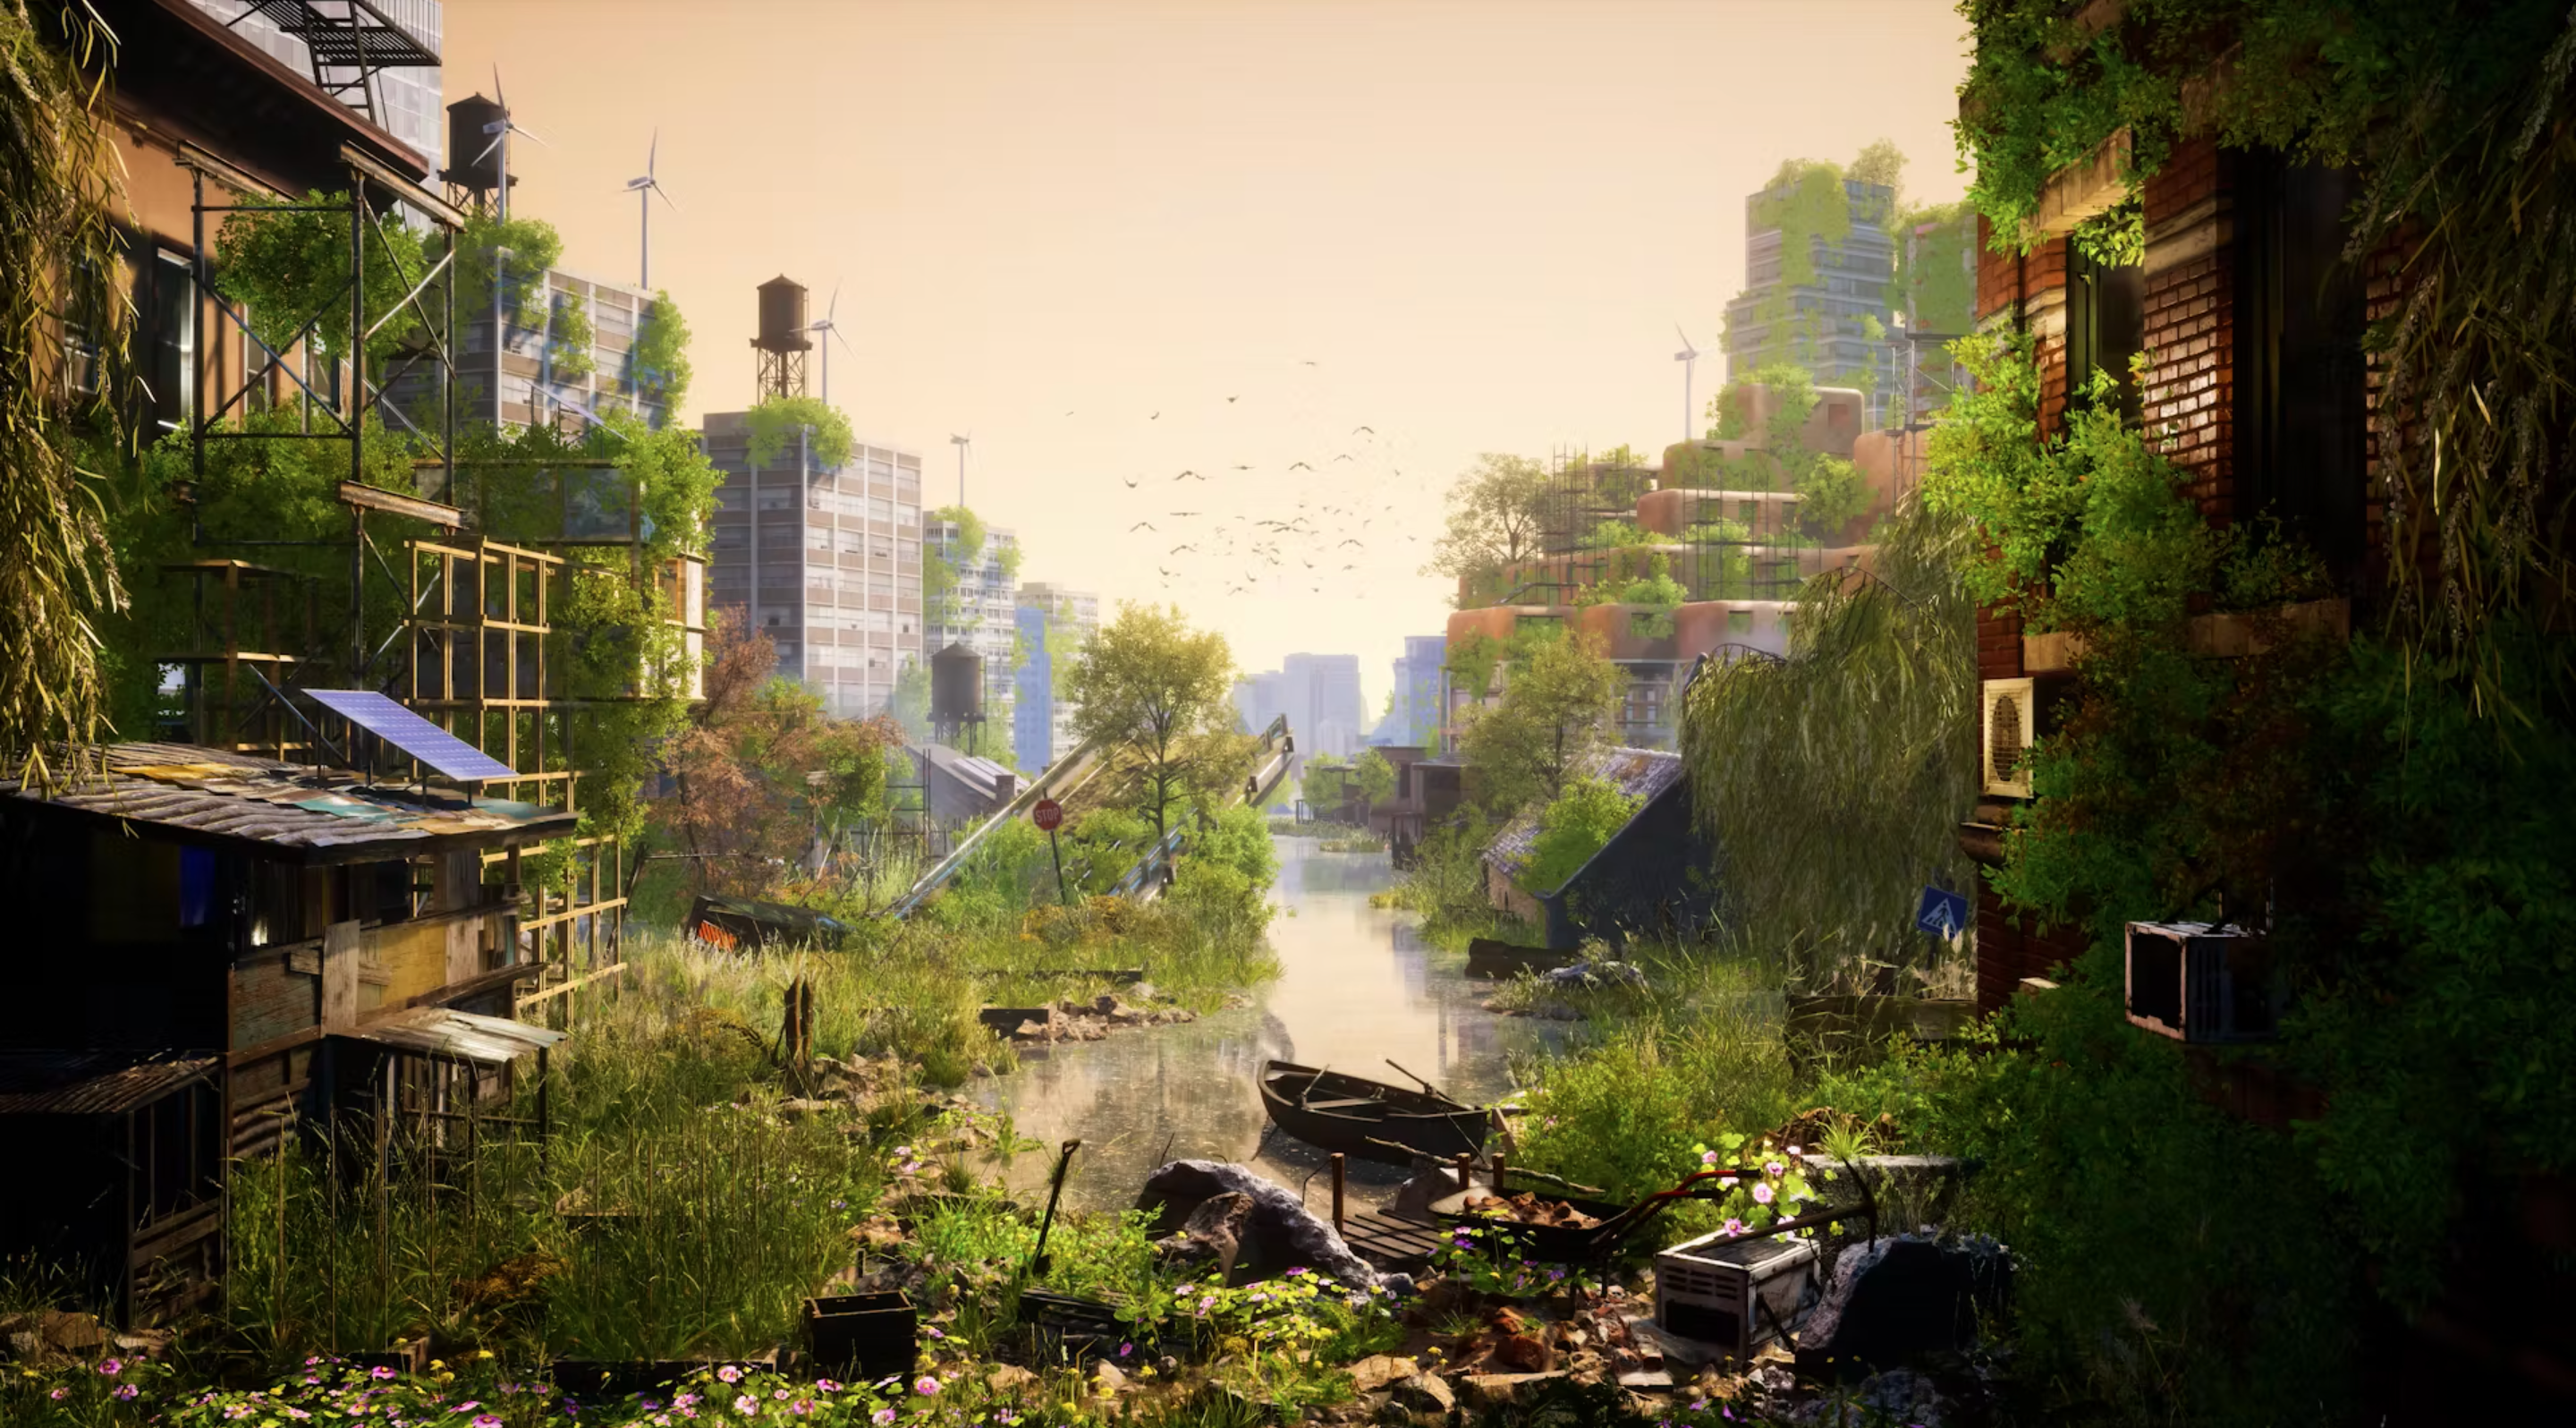 Still from an ambient video. It shows a future city that is clearly in a world of increased temperatures and sea level rise. Although the buildings are a bit run-down and patchily repaired, there are high tech elements like solar panels and wind turbines. It looks like nature has taken back the city somewhat, with lush green plants growing on every surface and birds in the distance.